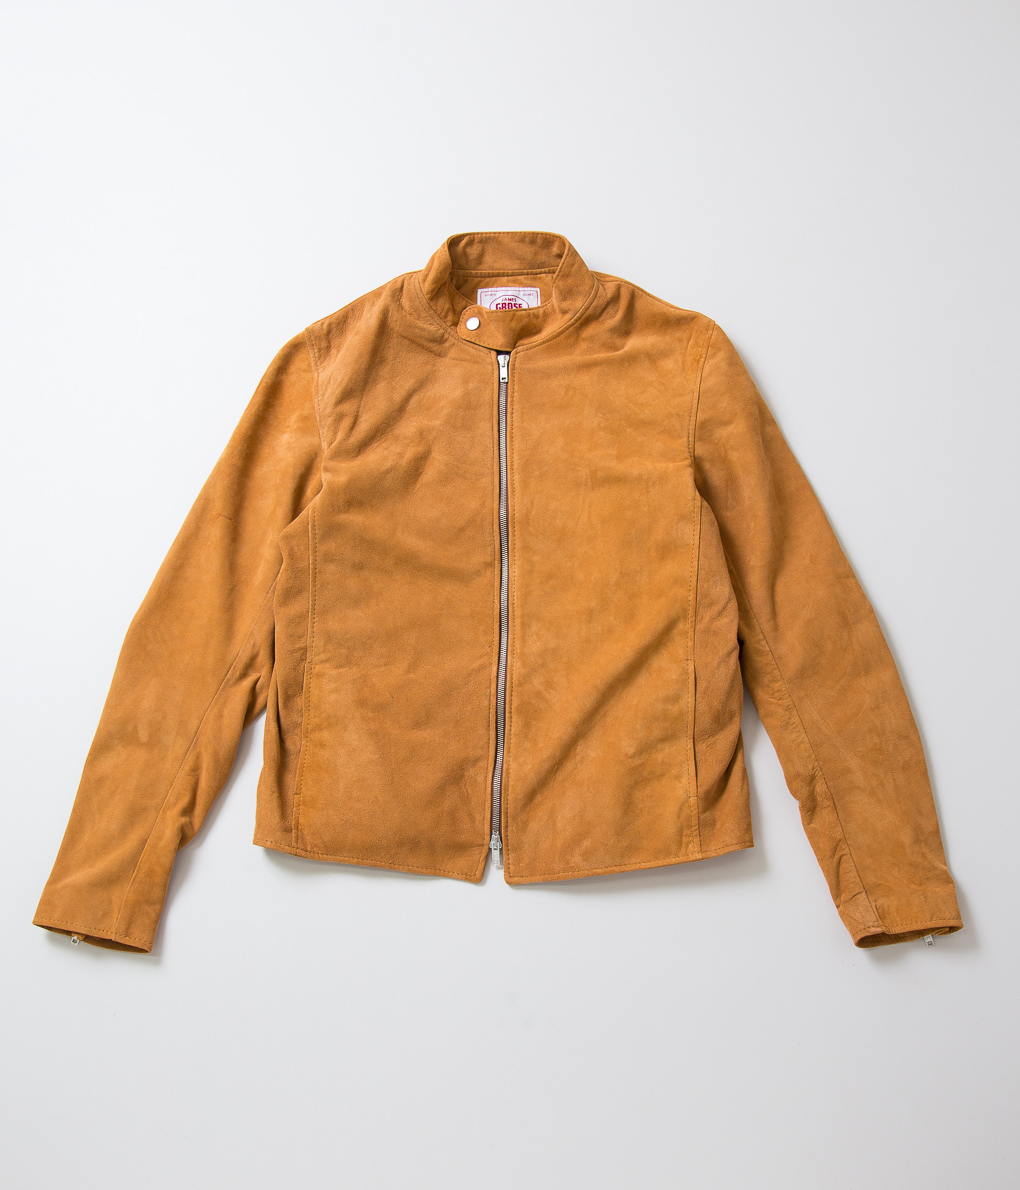 New Arrival “JAMES GROSE MENS DOVER JACKET” | well-made by MAIDENS